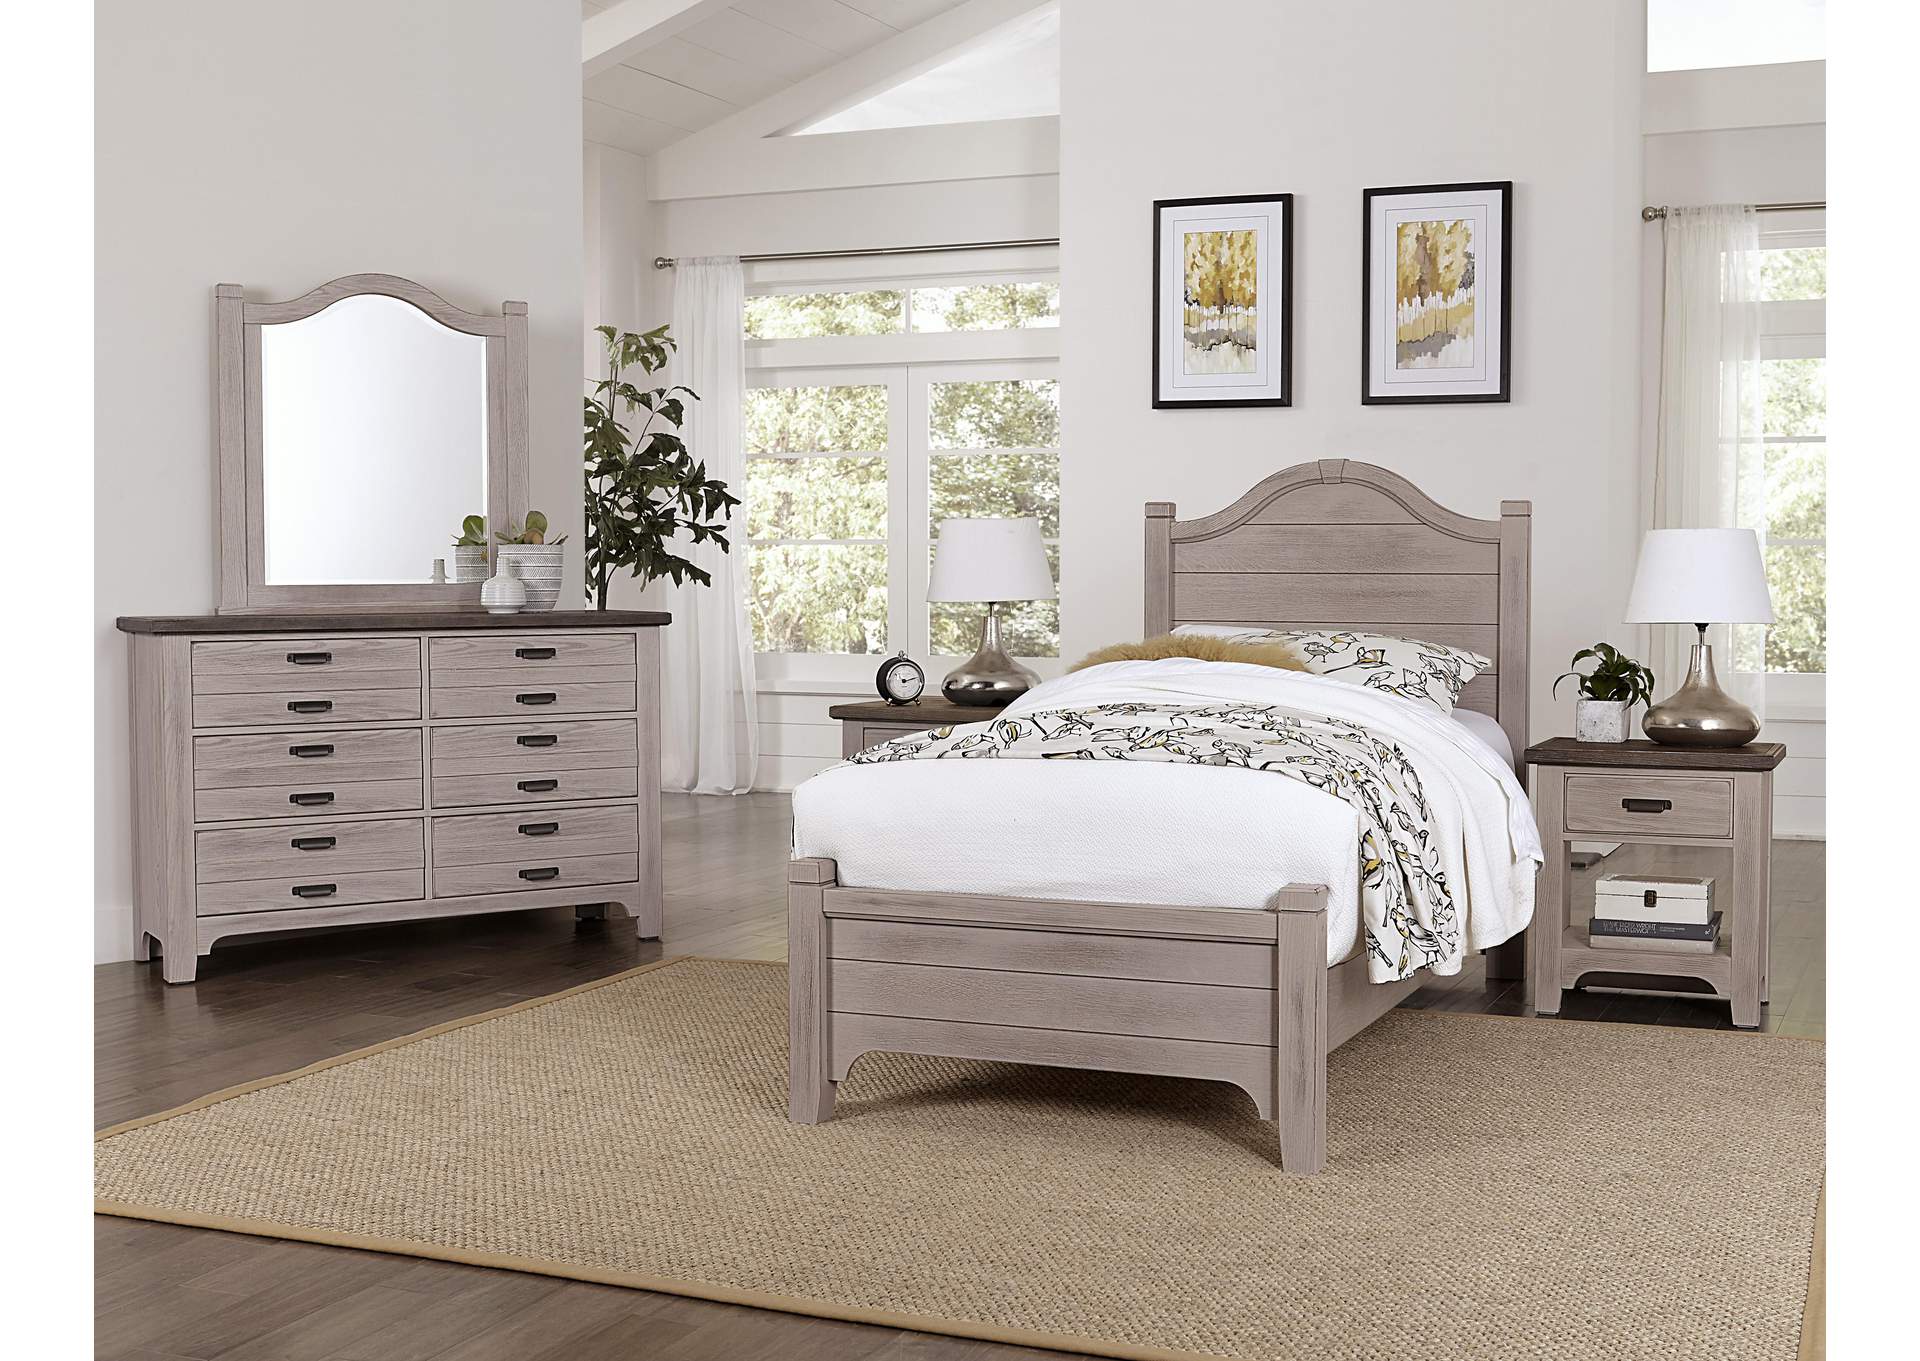 Bungalow Dover Grey with Folkstone Top Night Stand - 1 Drawer,Vaughan-Bassett